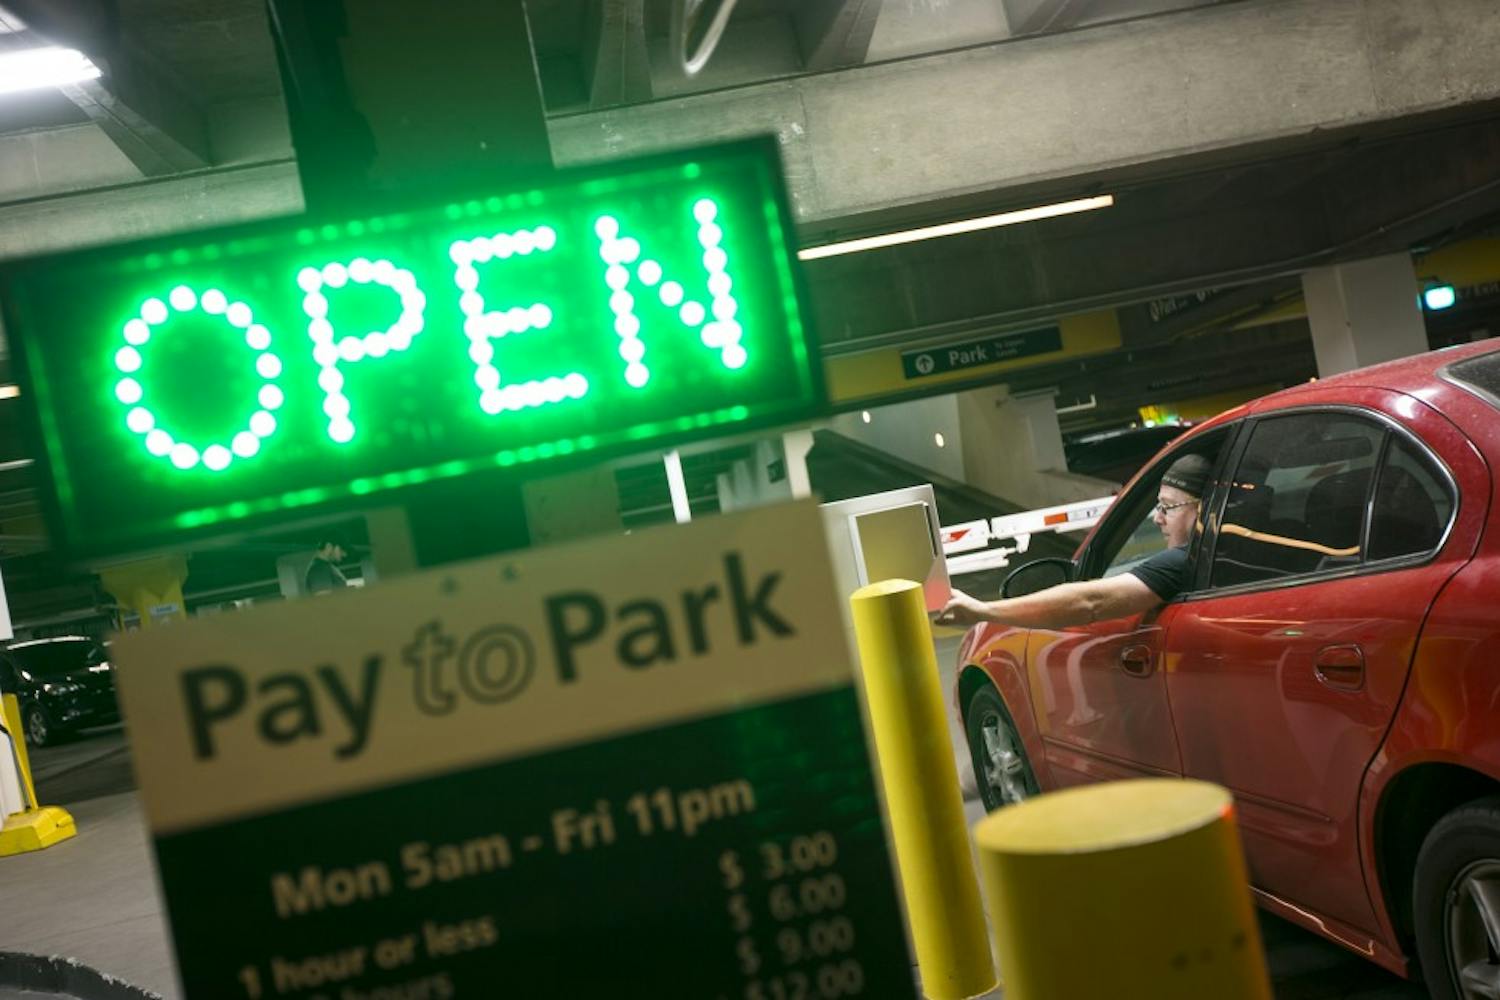 Jeff McSpadden pays for parking in the University Center parking garage on the Downtown Phoenix campus on Wednesday, Sept. 21, 2016.